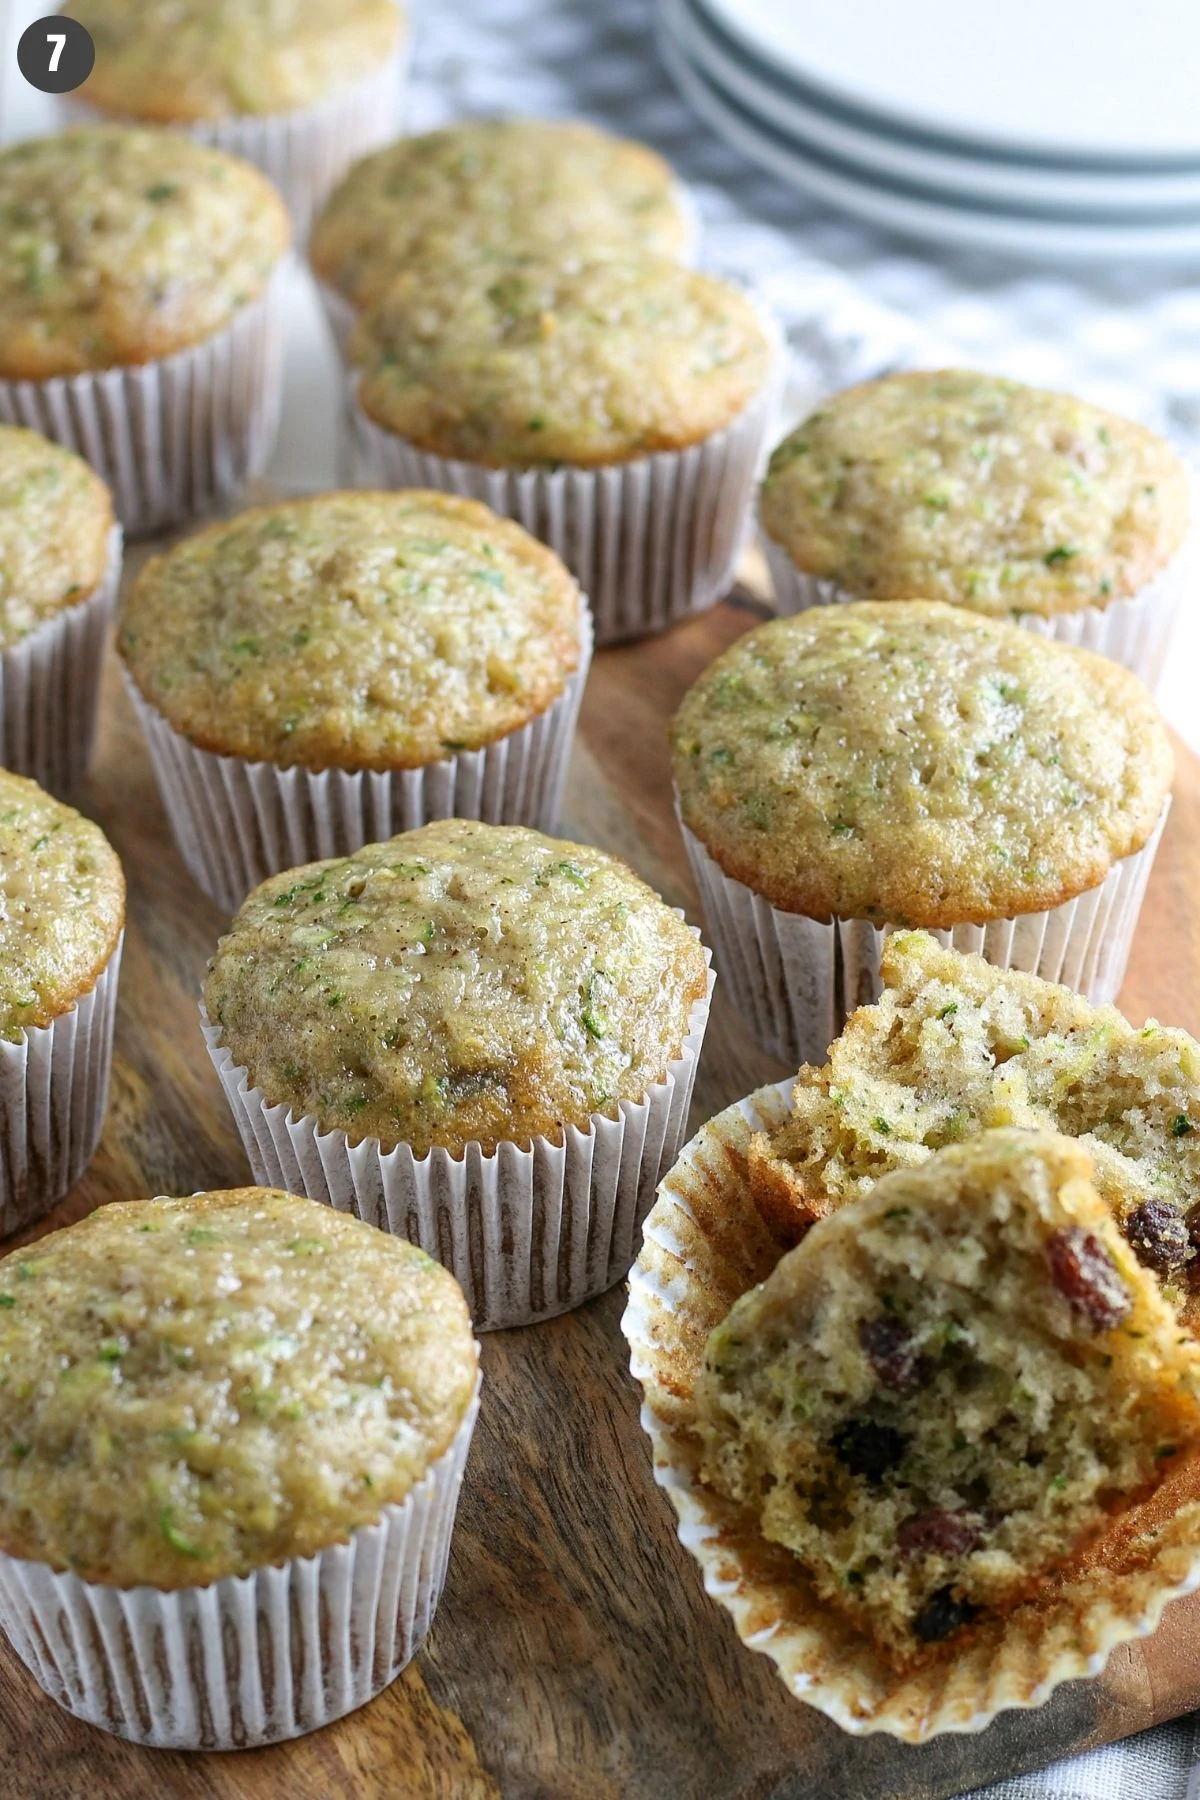 baked gluten-free dairy-free zucchini muffins cooling on wooden cutting board